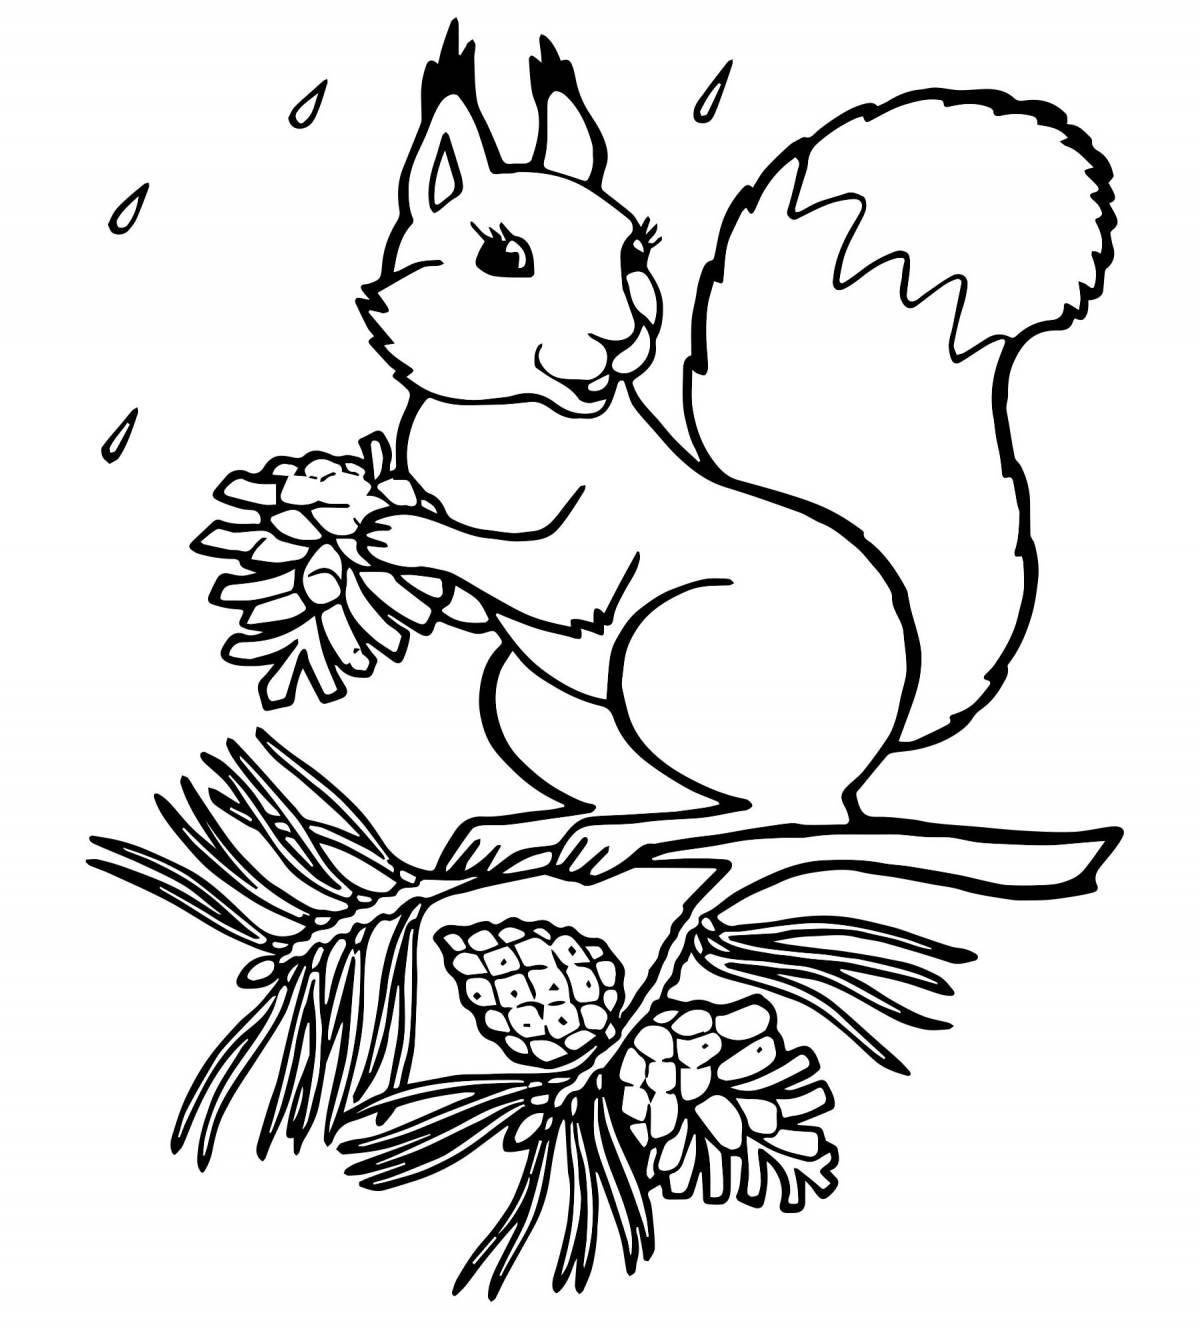 A fun drawing of a squirrel for kids